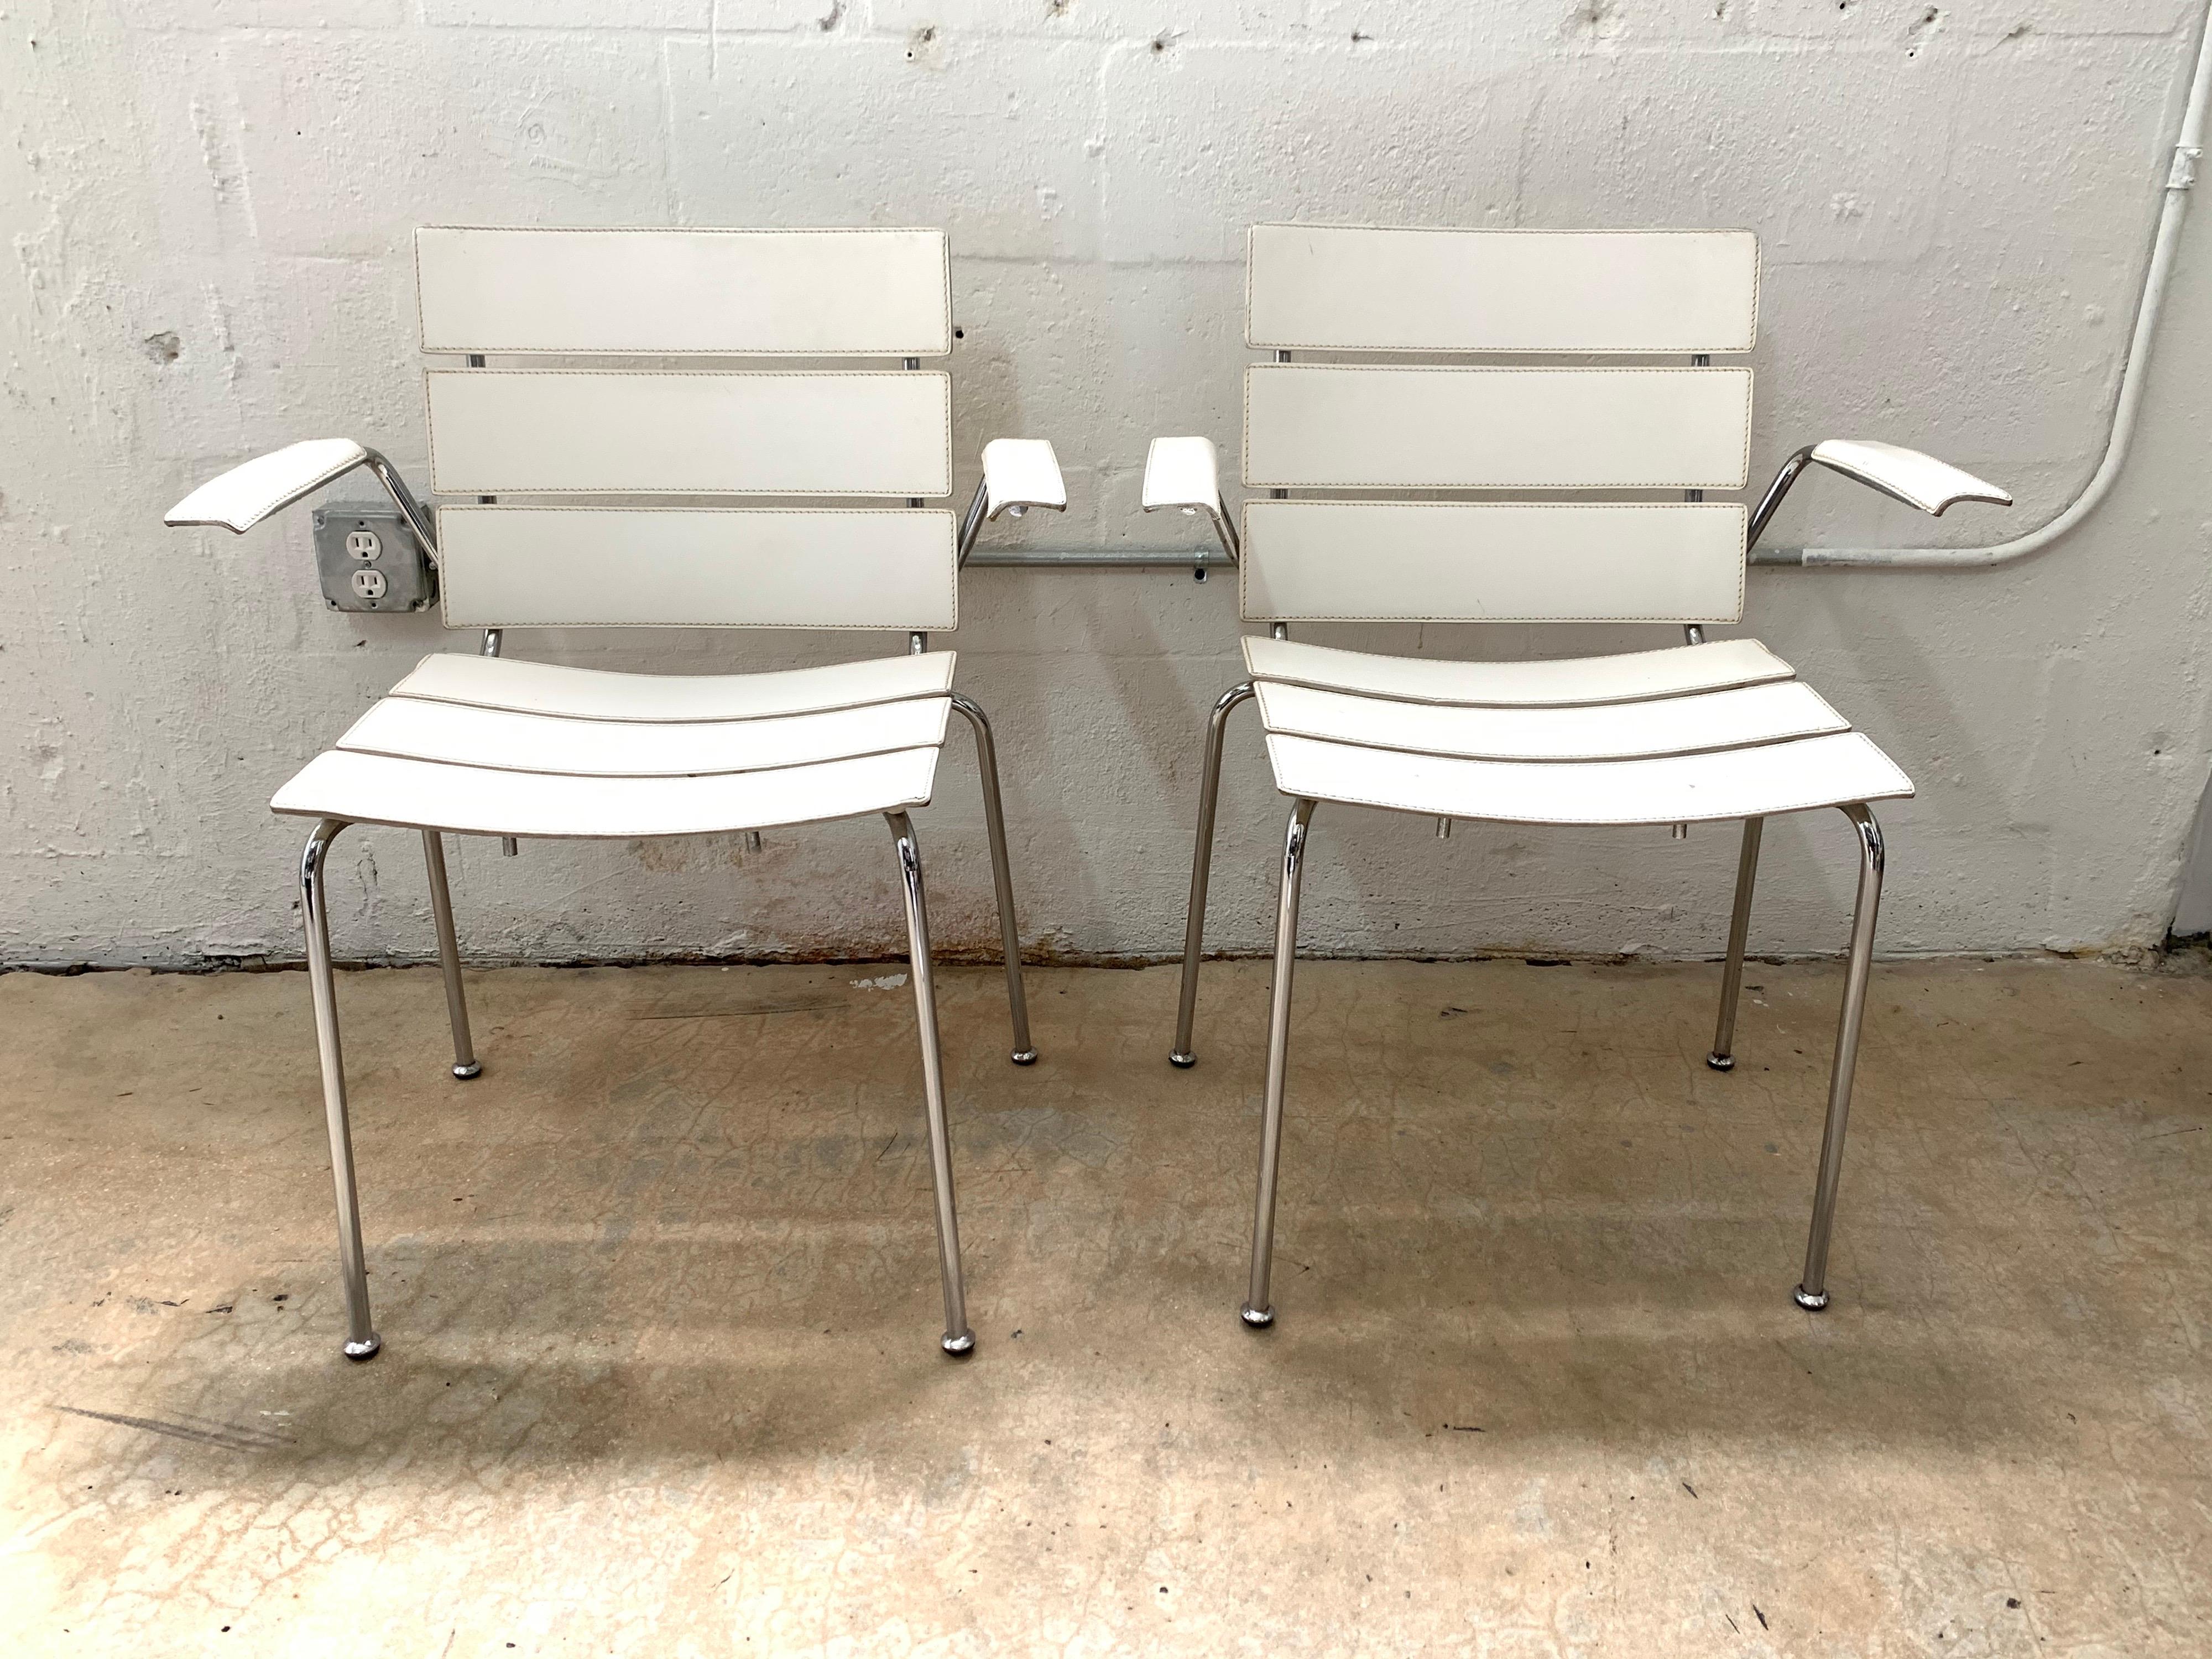 Pair of rare chairs rendered in white stitched leather seat, back, and arms with chrome-plated steel frames designed by Giancarlo Vegni for Fasem, made in Italy, 1999.